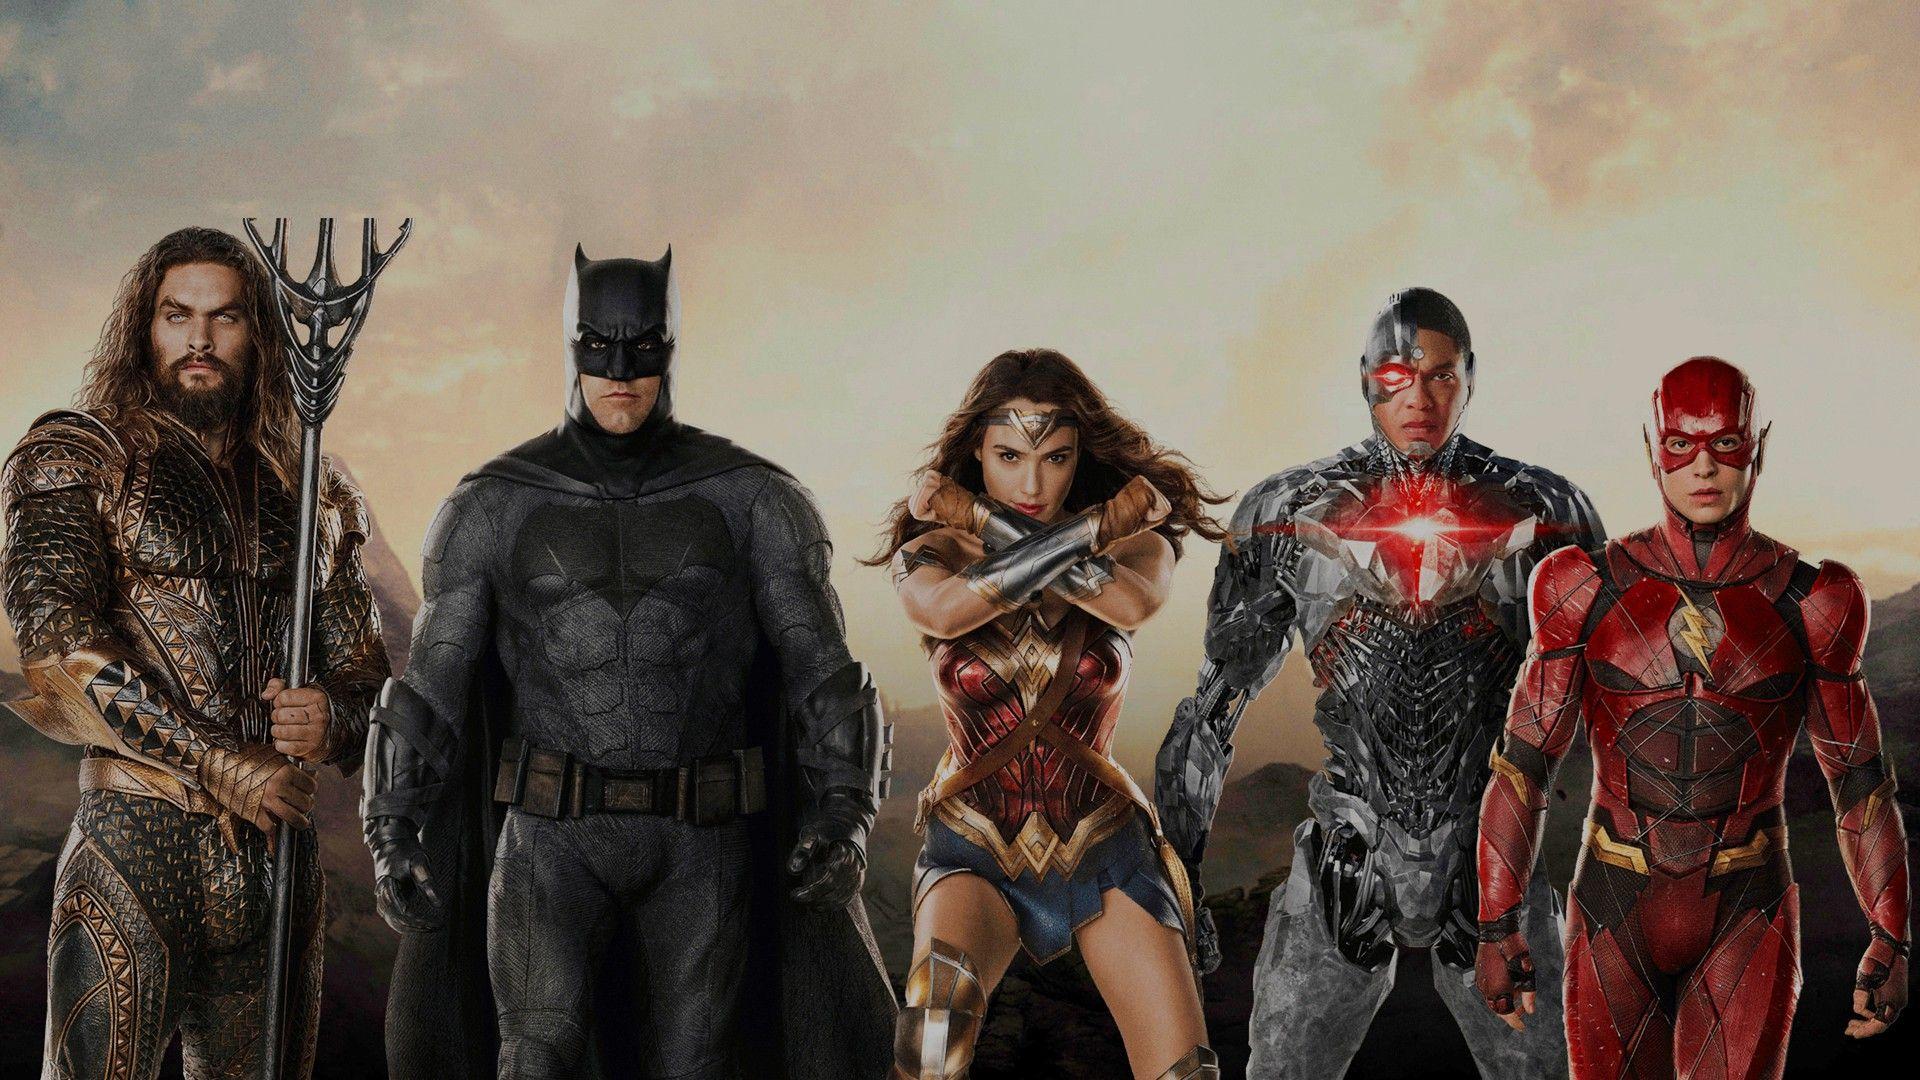 Justice League Movie Wallpaper On Wallpaper 1080p HD